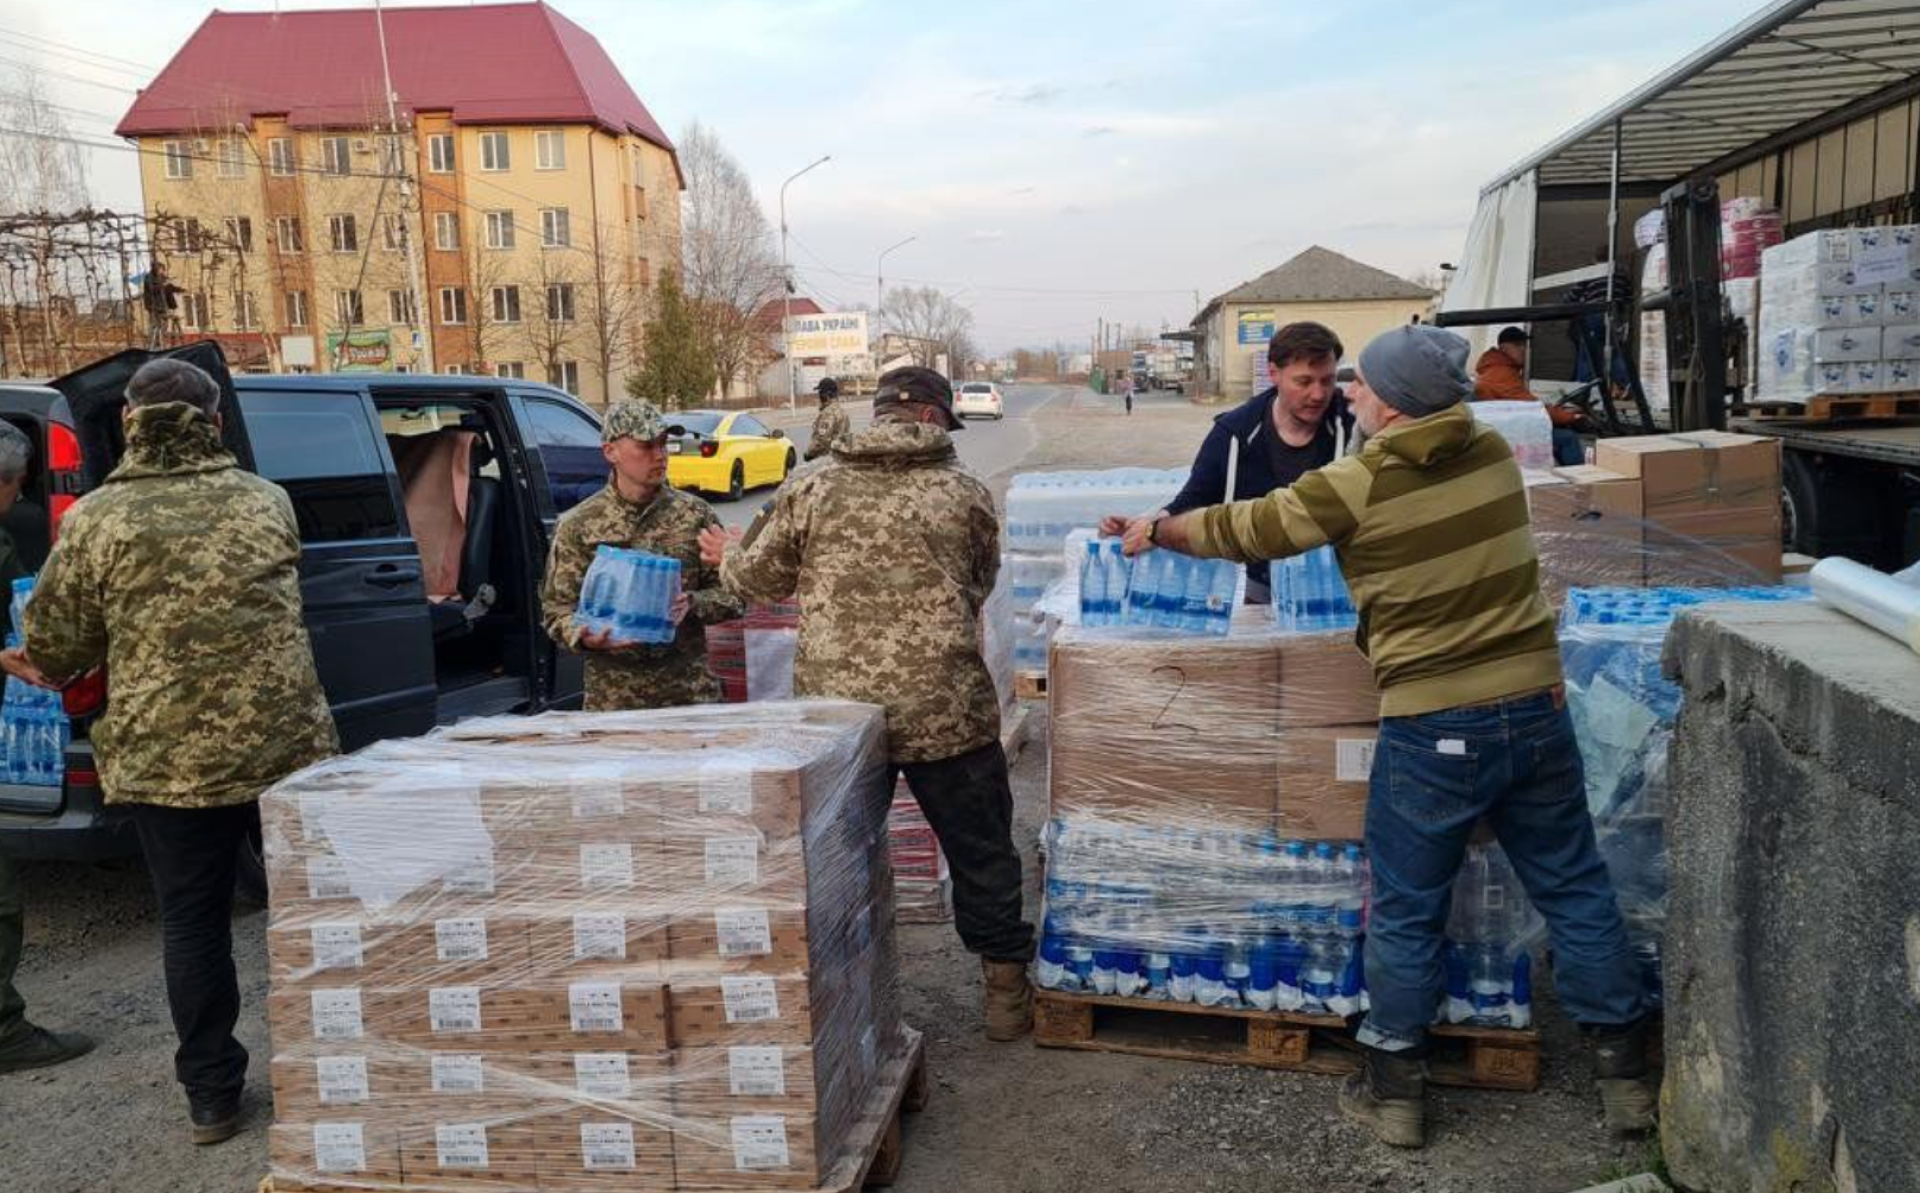 U-Lead  with Europe helps to deliver emergency aid from Slovenia